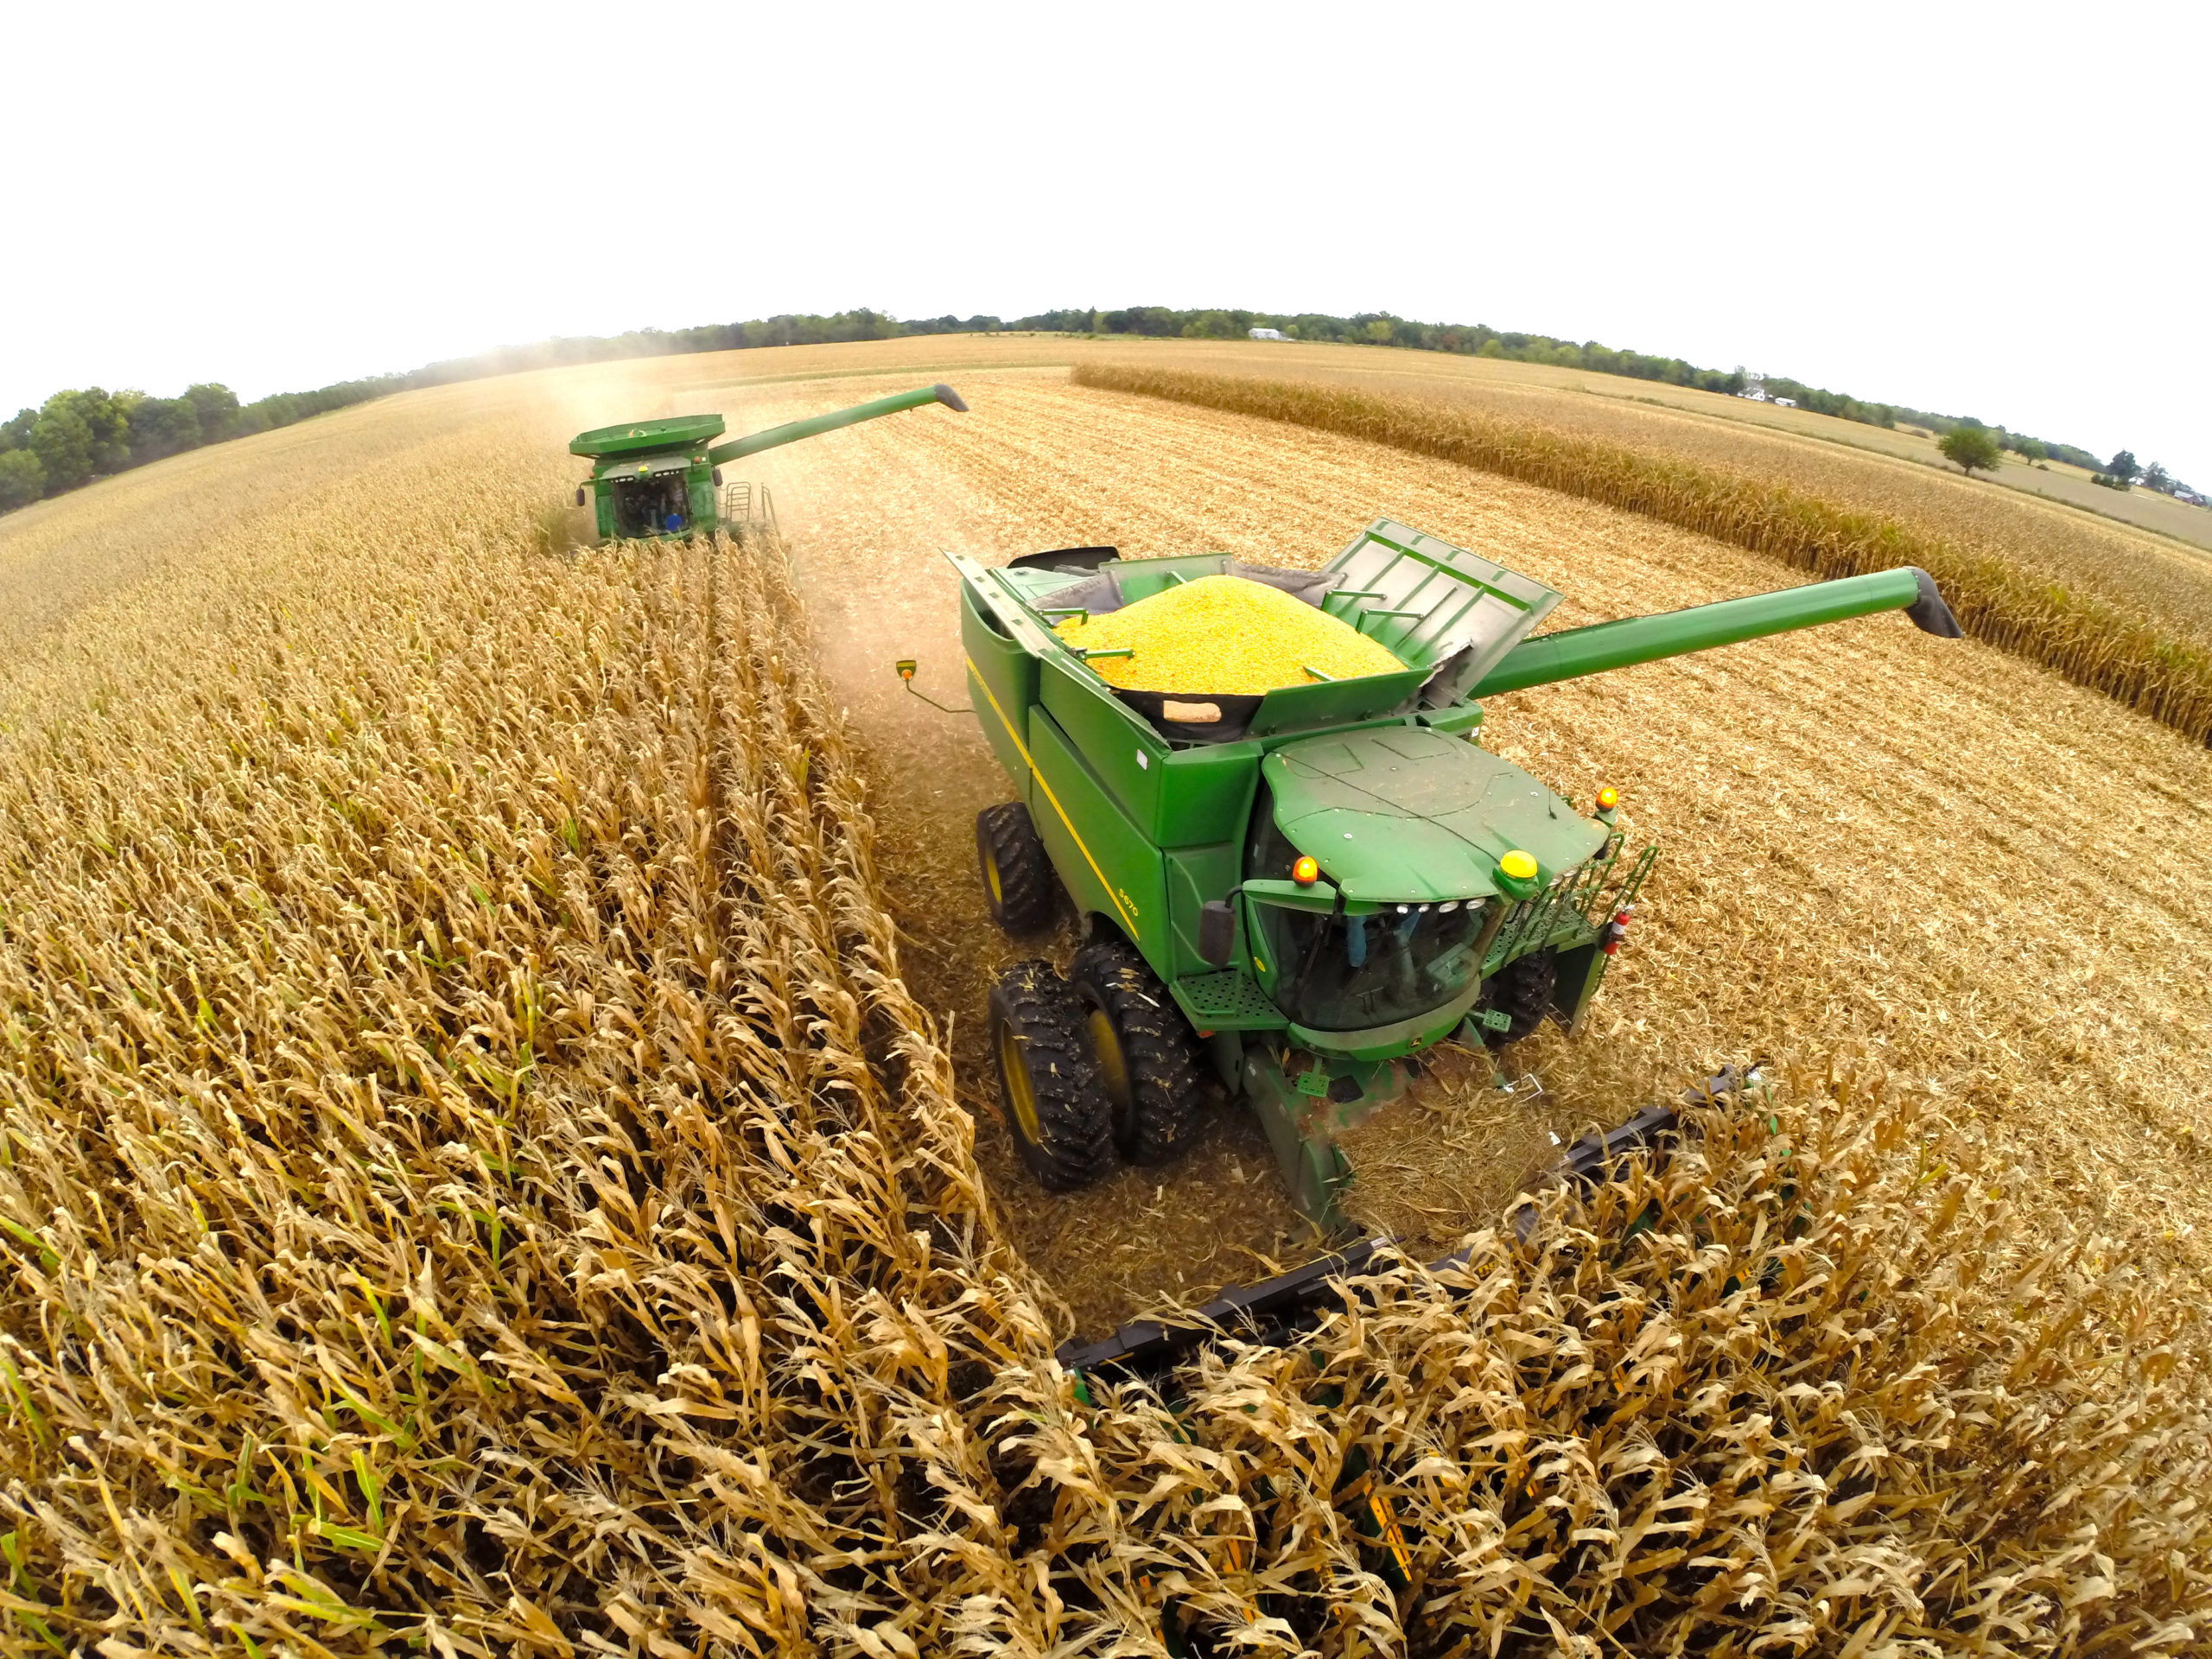 How Many Acres Of Corn Can A Combine Harvest Per Hour